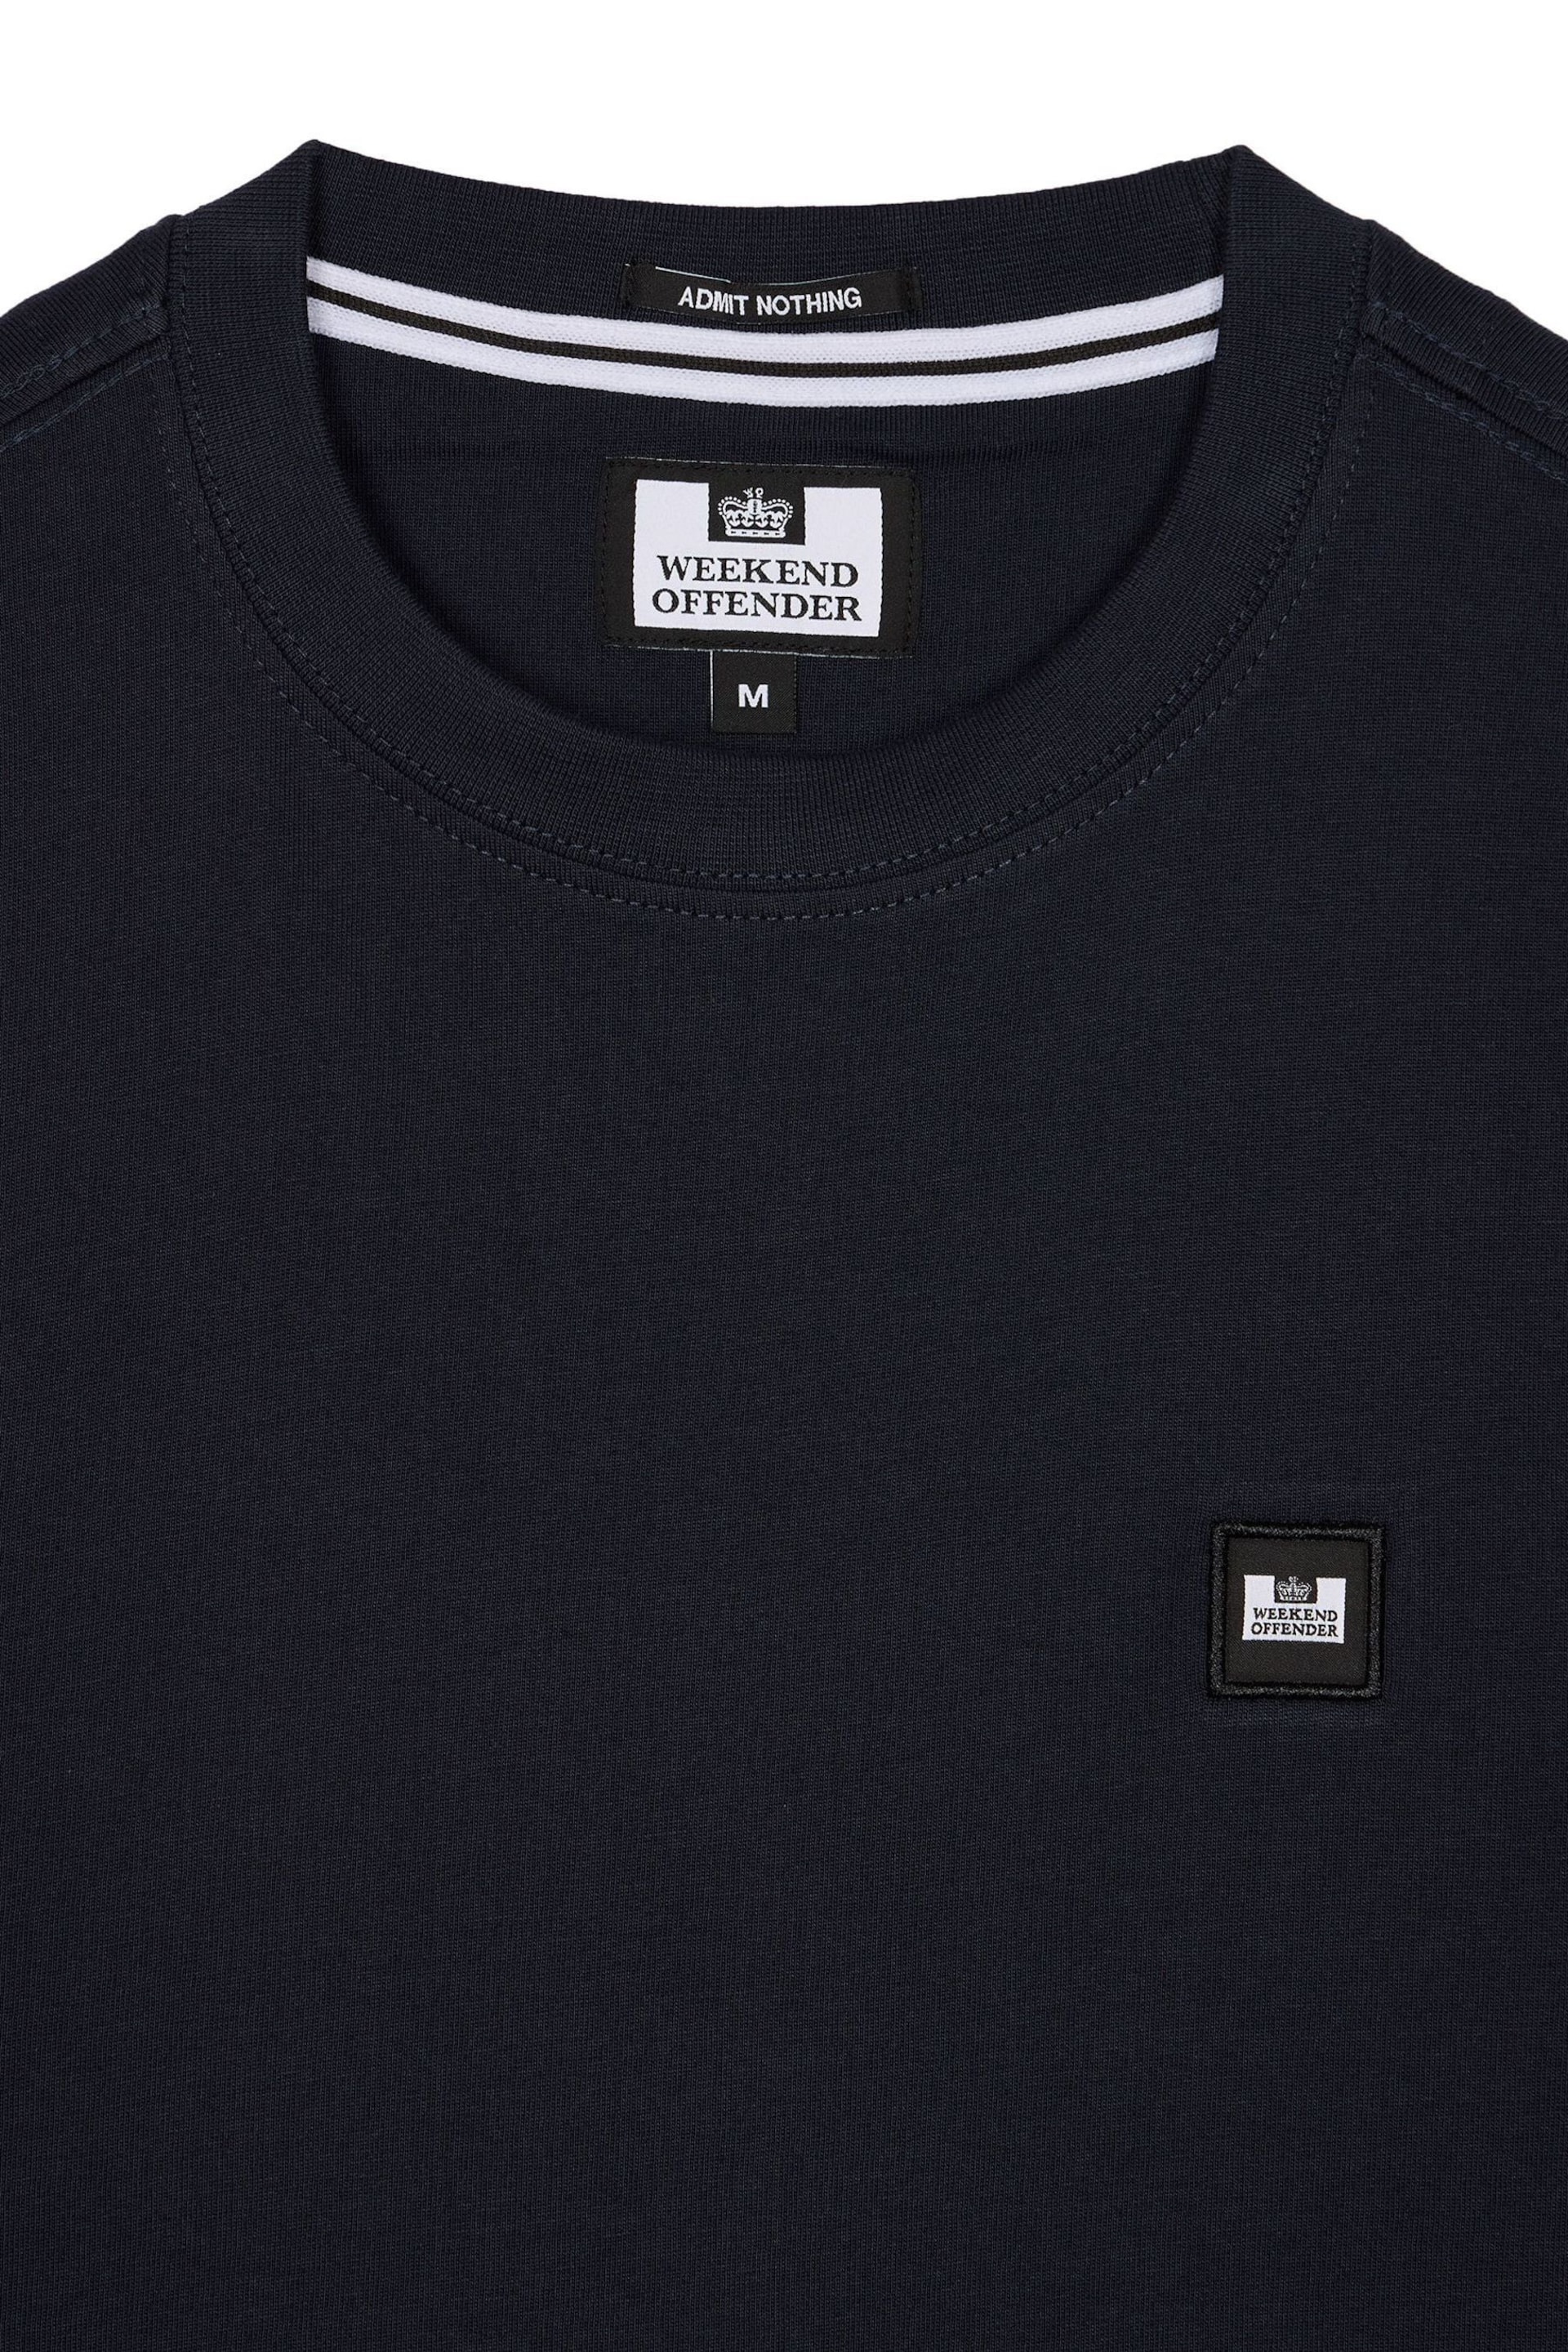 Weekend Offender Cannon Beach T-Shirt - Image 5 of 6